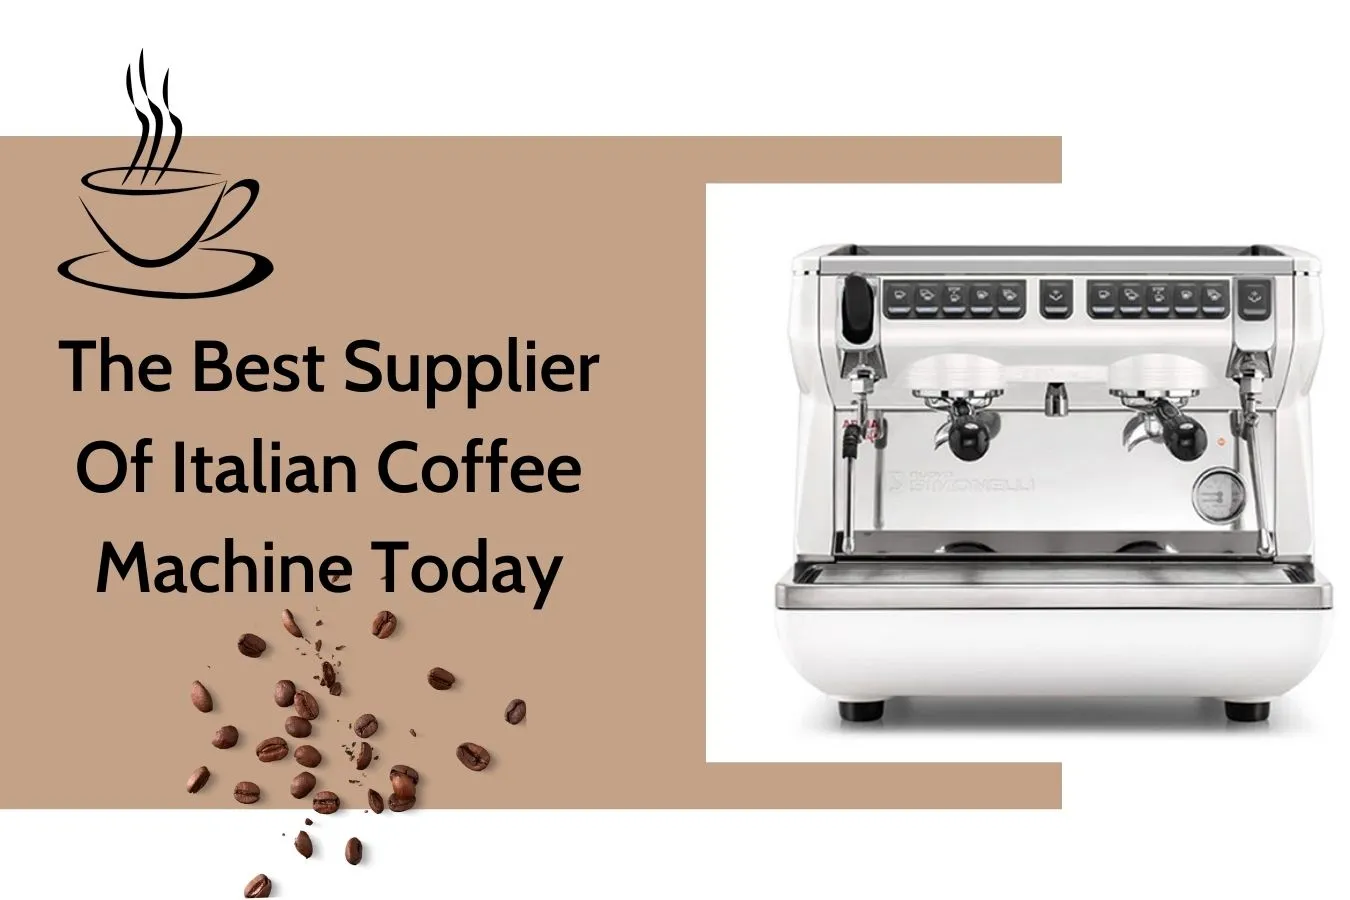 The Best Supplier Of Italian Coffee Machine Today